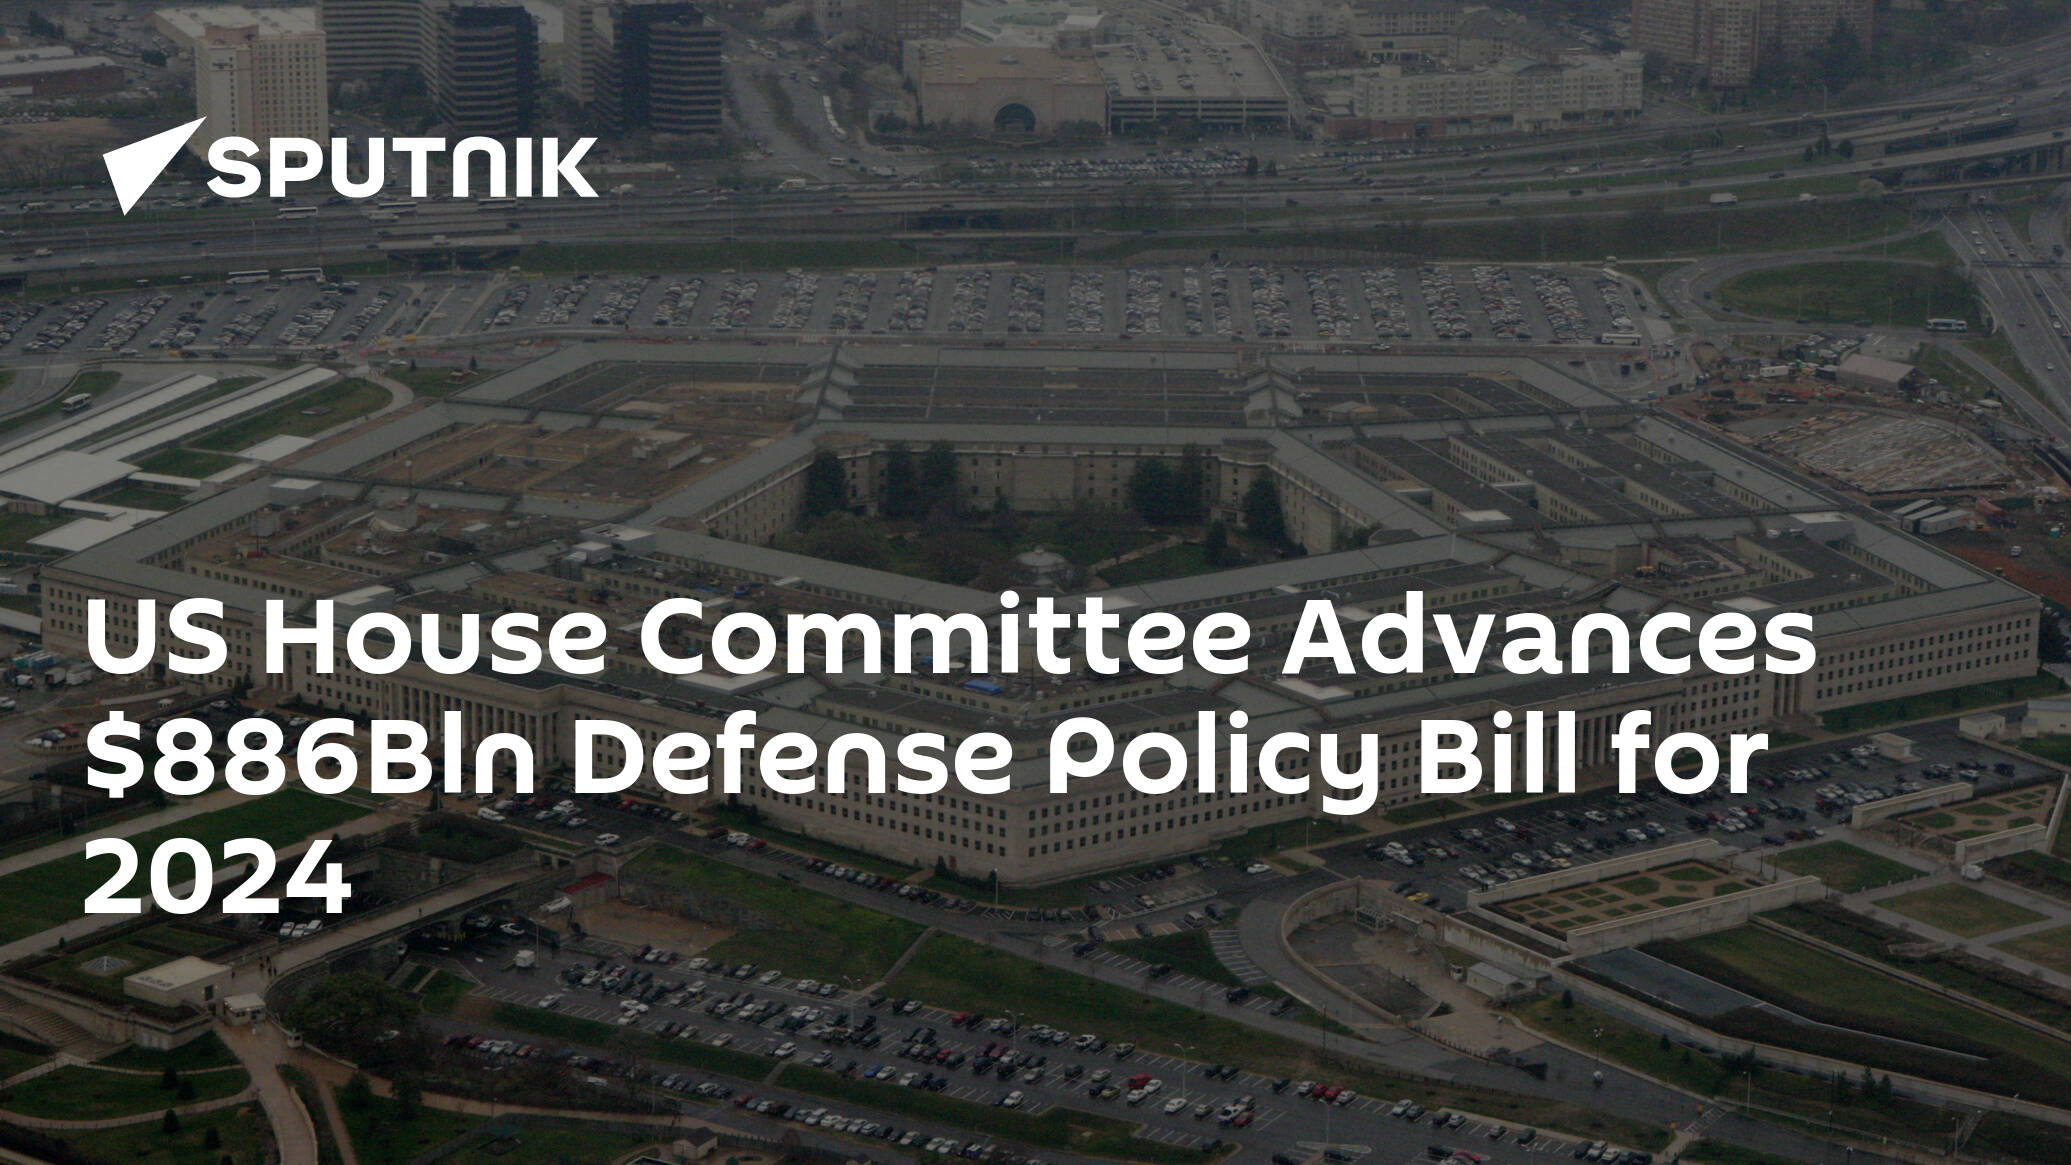 US House Committee Advances 6Bln Defense Policy Bill for 2024